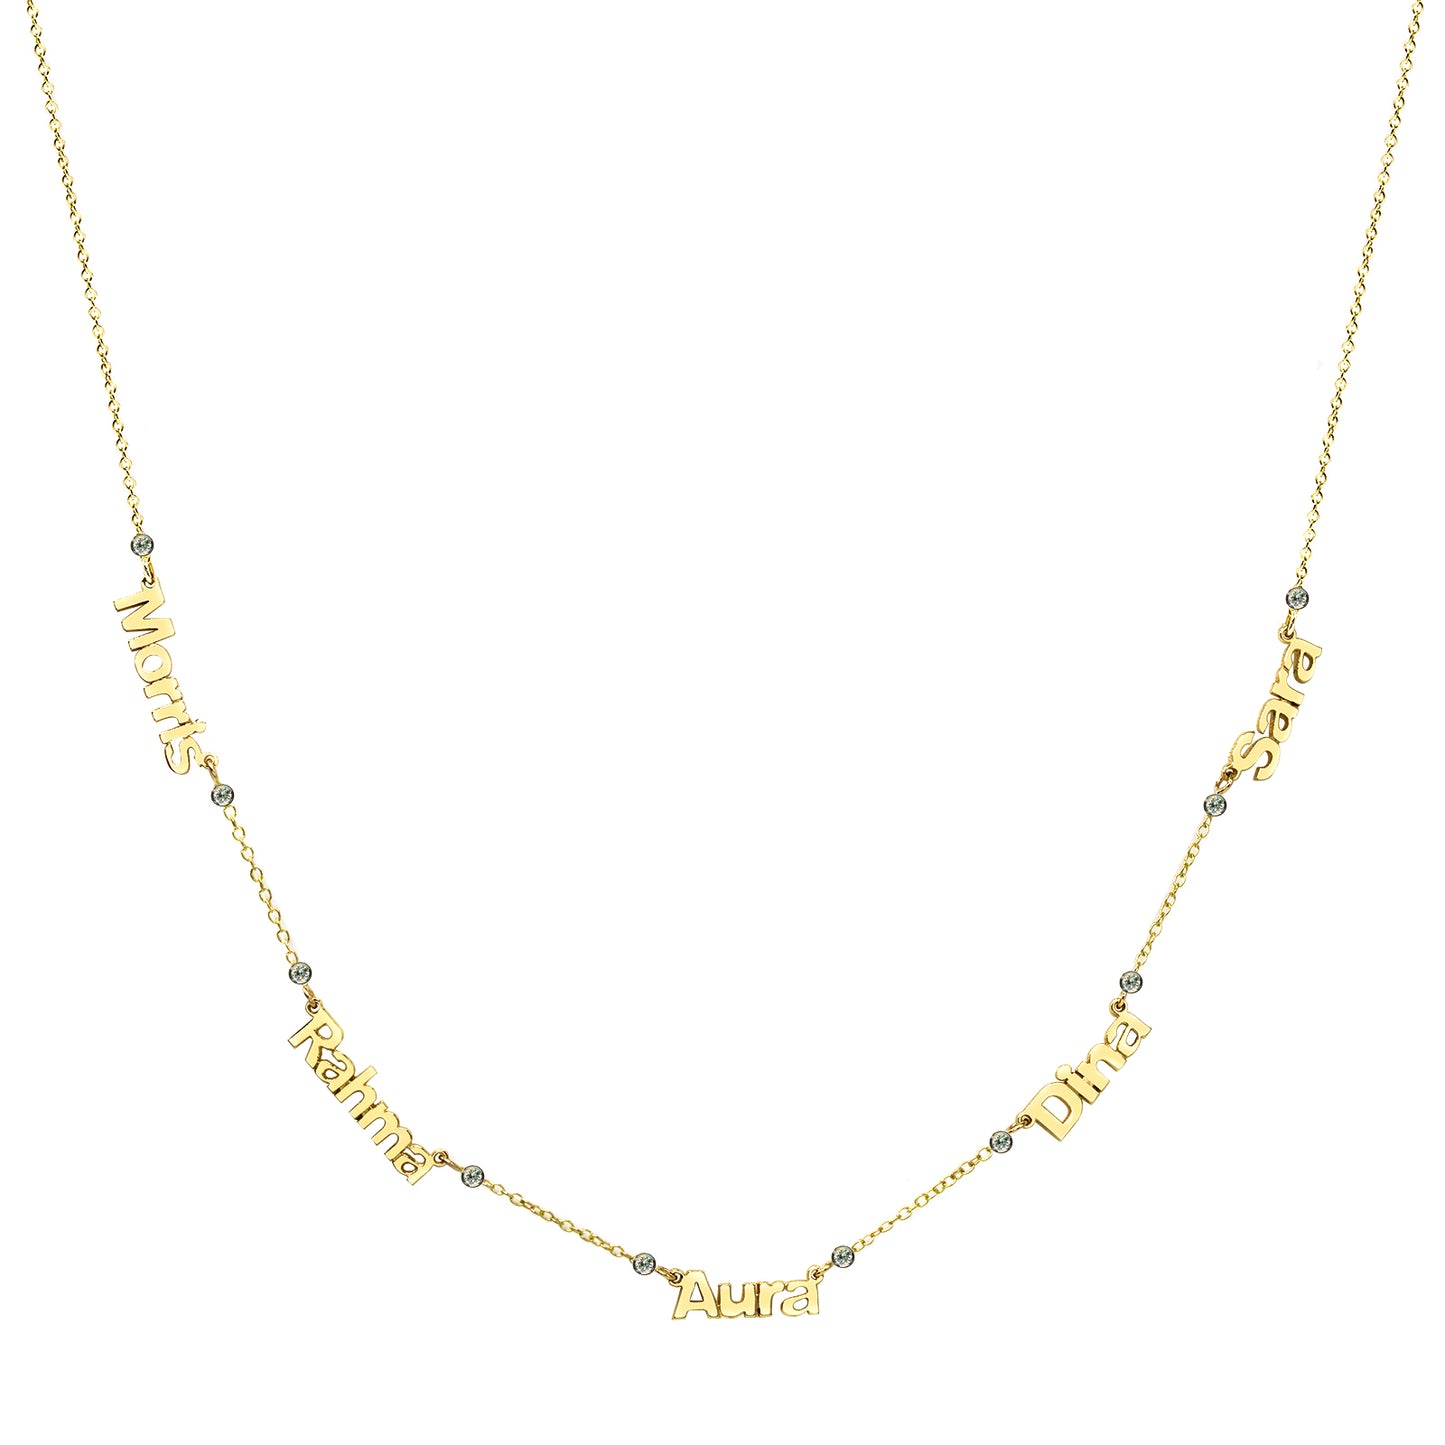 Multi-Name Necklace in 14K Gold with Diamond Accents